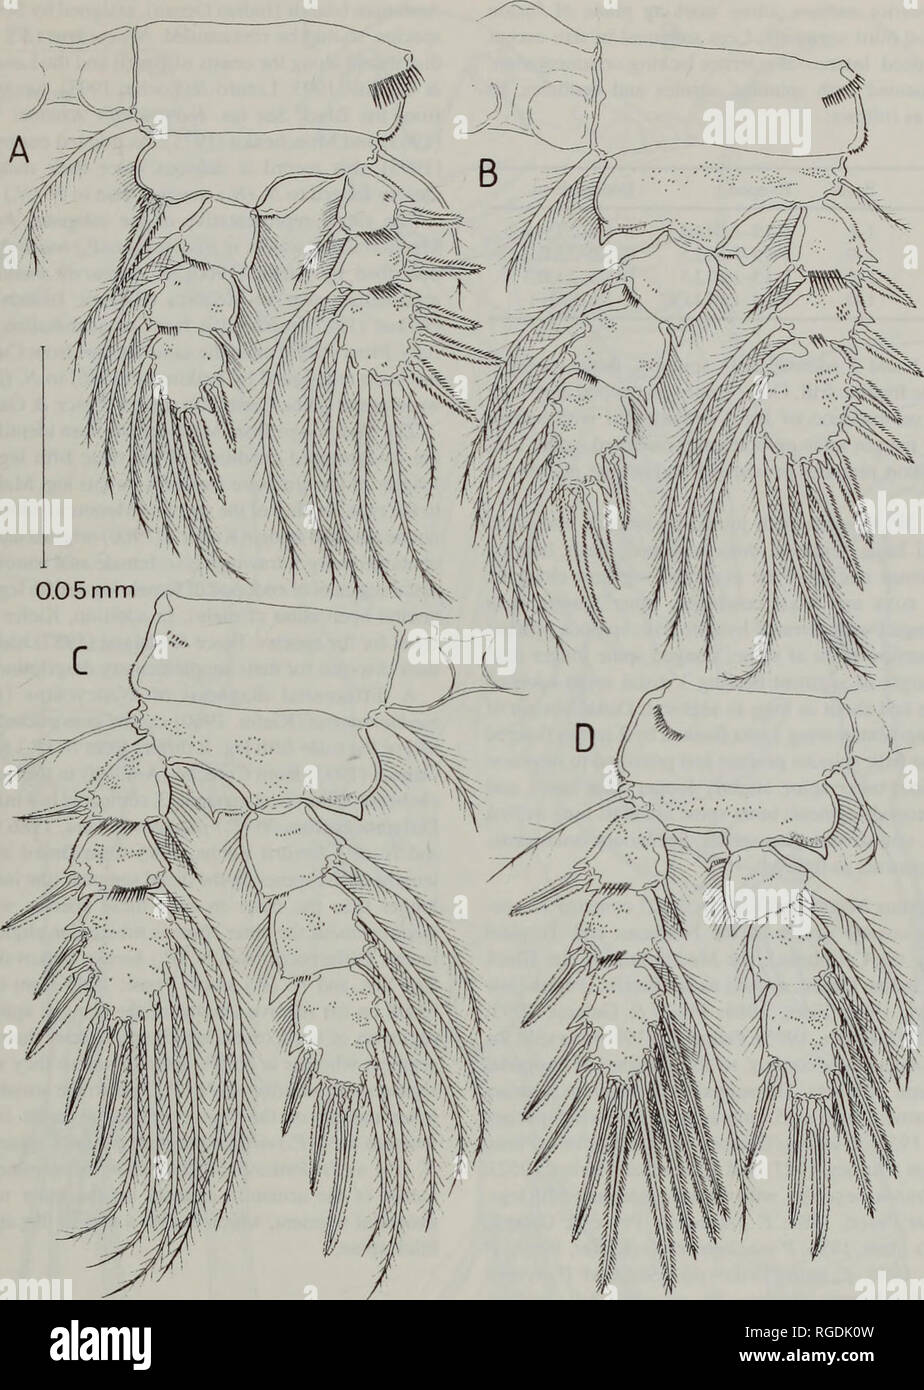 . Bulletin of the Natural History Museum Zoology. CYCLOPOIDS FROM LITTORAL CAVES 91. Fig. 7. Neocyclops (Protoneocyclops) mediterraneus (Kiefer, 1960), adult male swimming legs, posterior view. A. leg 1; B, leg 2; C, leg 3; D, leg 4. patches of tiny denticles on segment, as figured. Palp comprising coxobasis with 1 spinulate spine and 2 setae distally and 1 seta (representing exopod) implanted on outer margin, and 1-segmented endopod bearing 3 setae (obscured in Fig. 6D). Maxilla (Fig. 6E) 4-segmented, powerfully developed. Praecoxa and coxa separate. Praecoxa with single, distal endite armed  Stock Photo